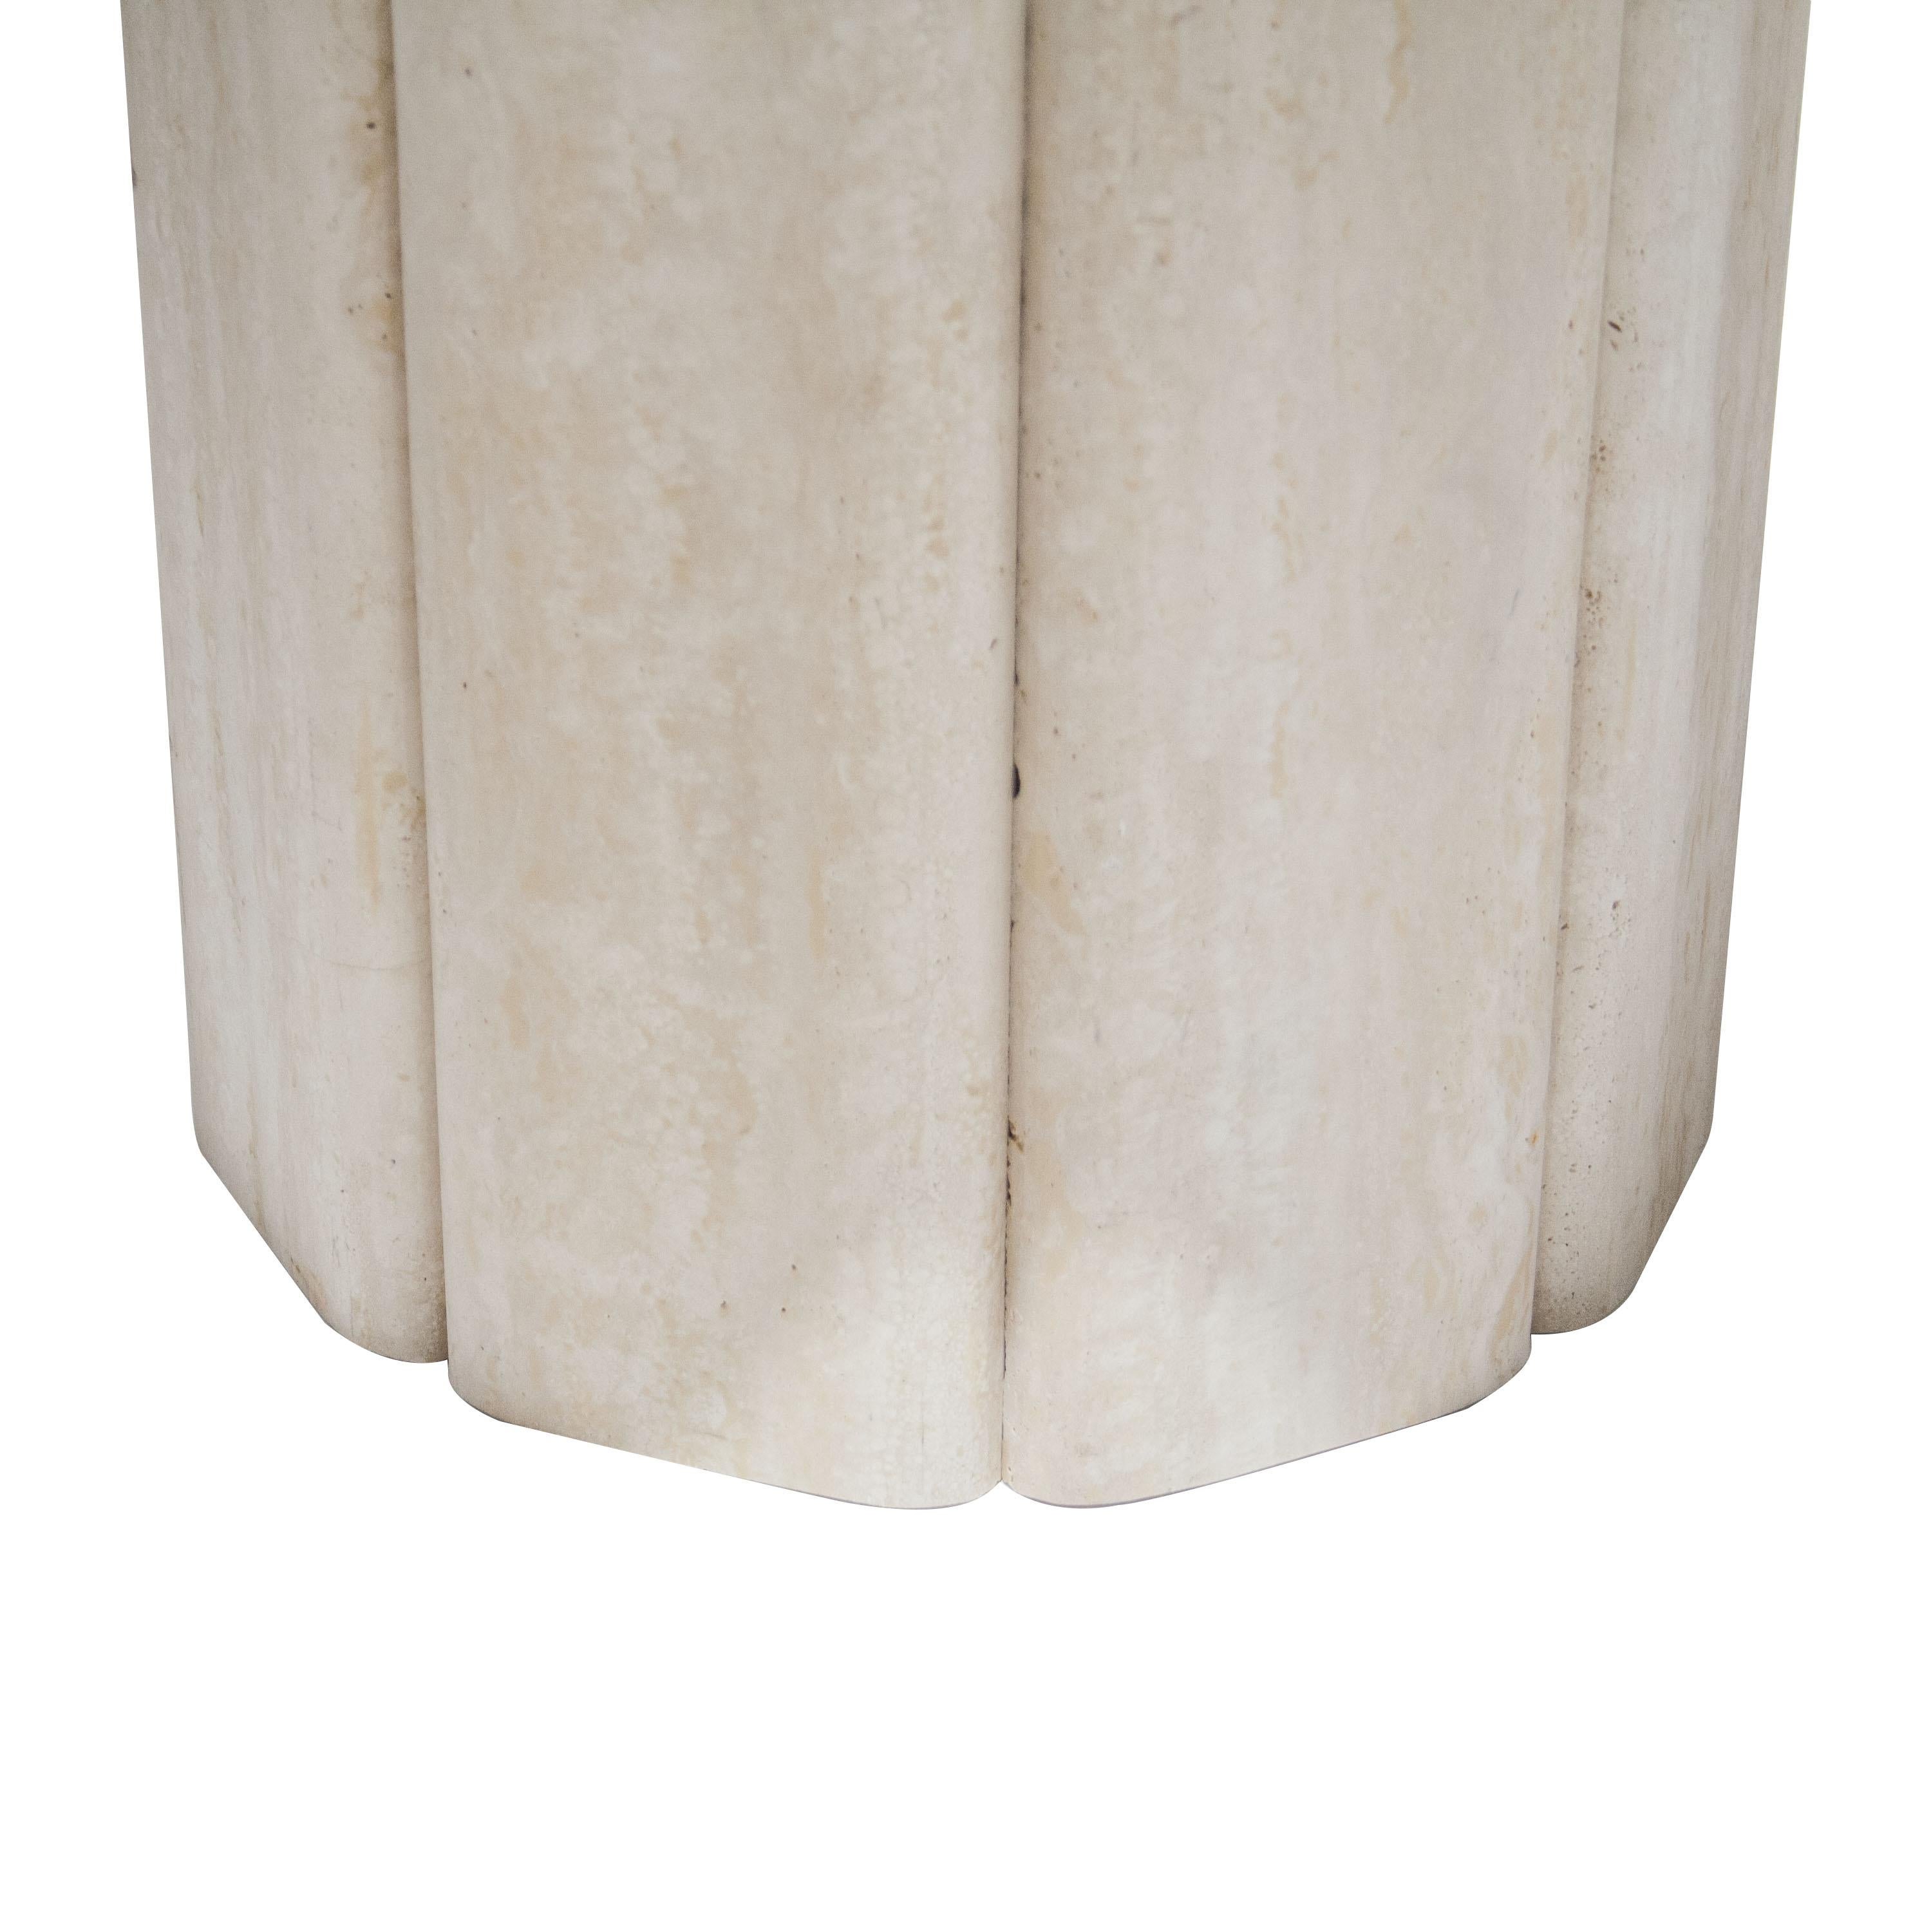 Late 20th Century Hexagonal Beige Travertine Marble Italian Pair of Side Tables, Italy, 1970